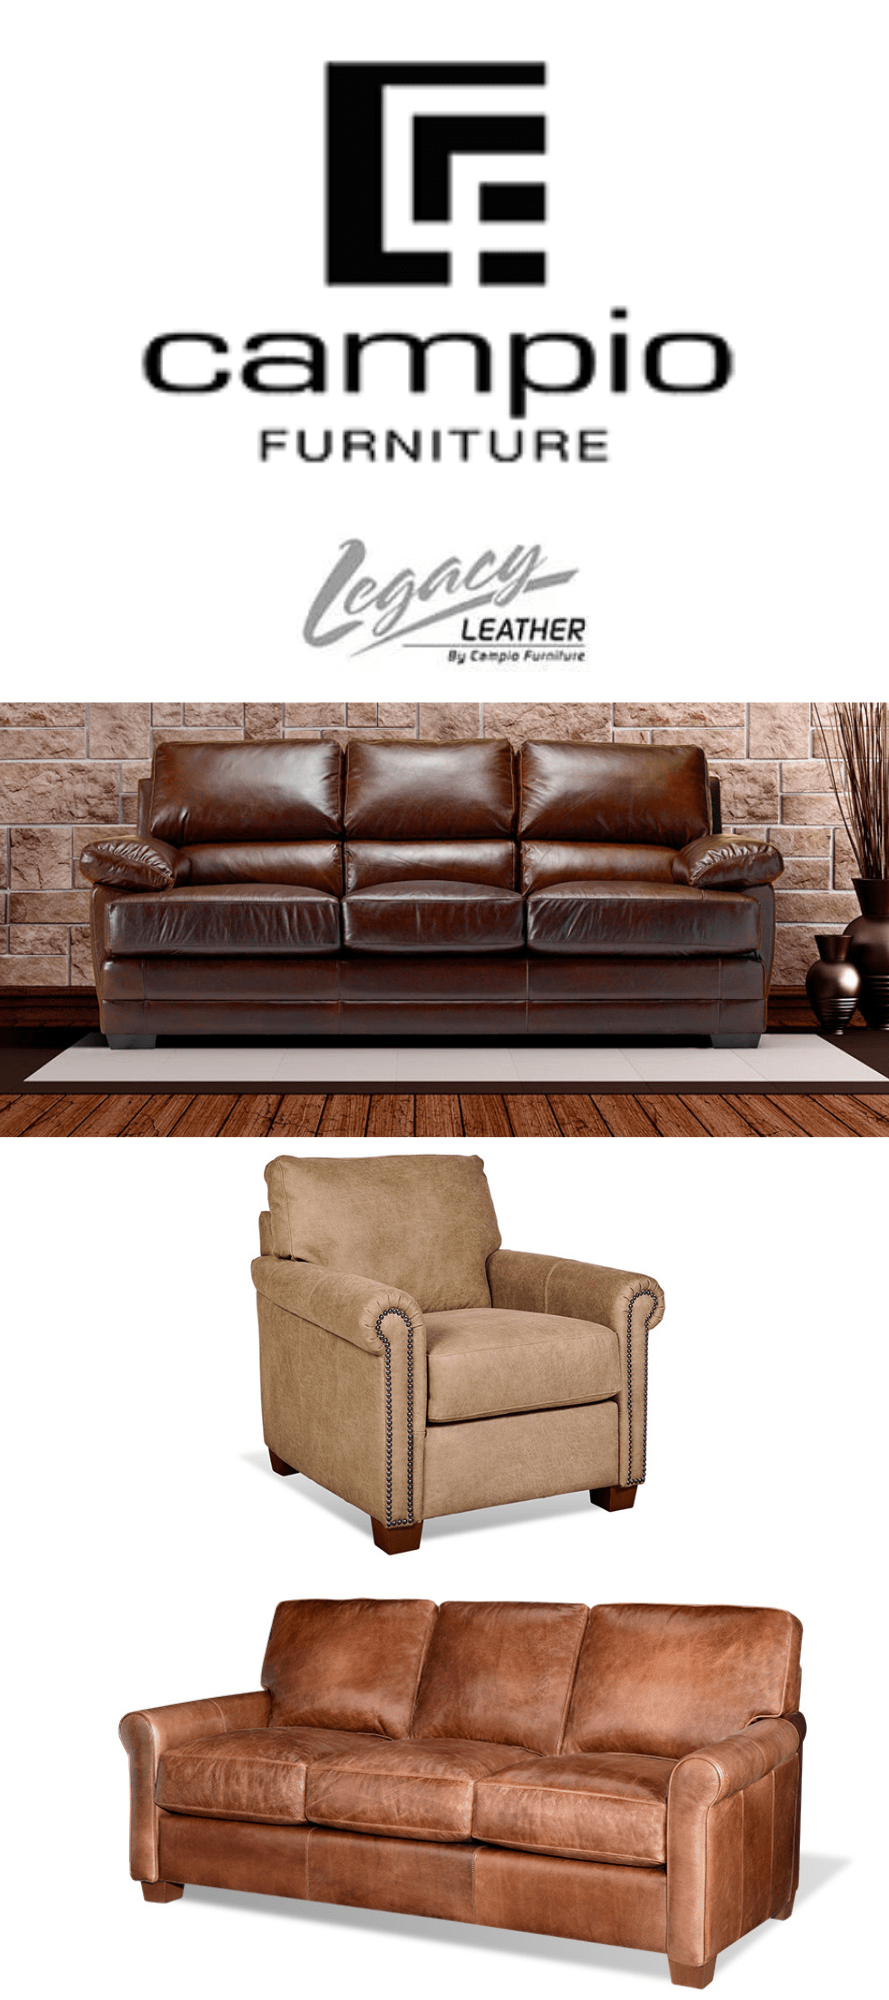 Legacy leather by Campio